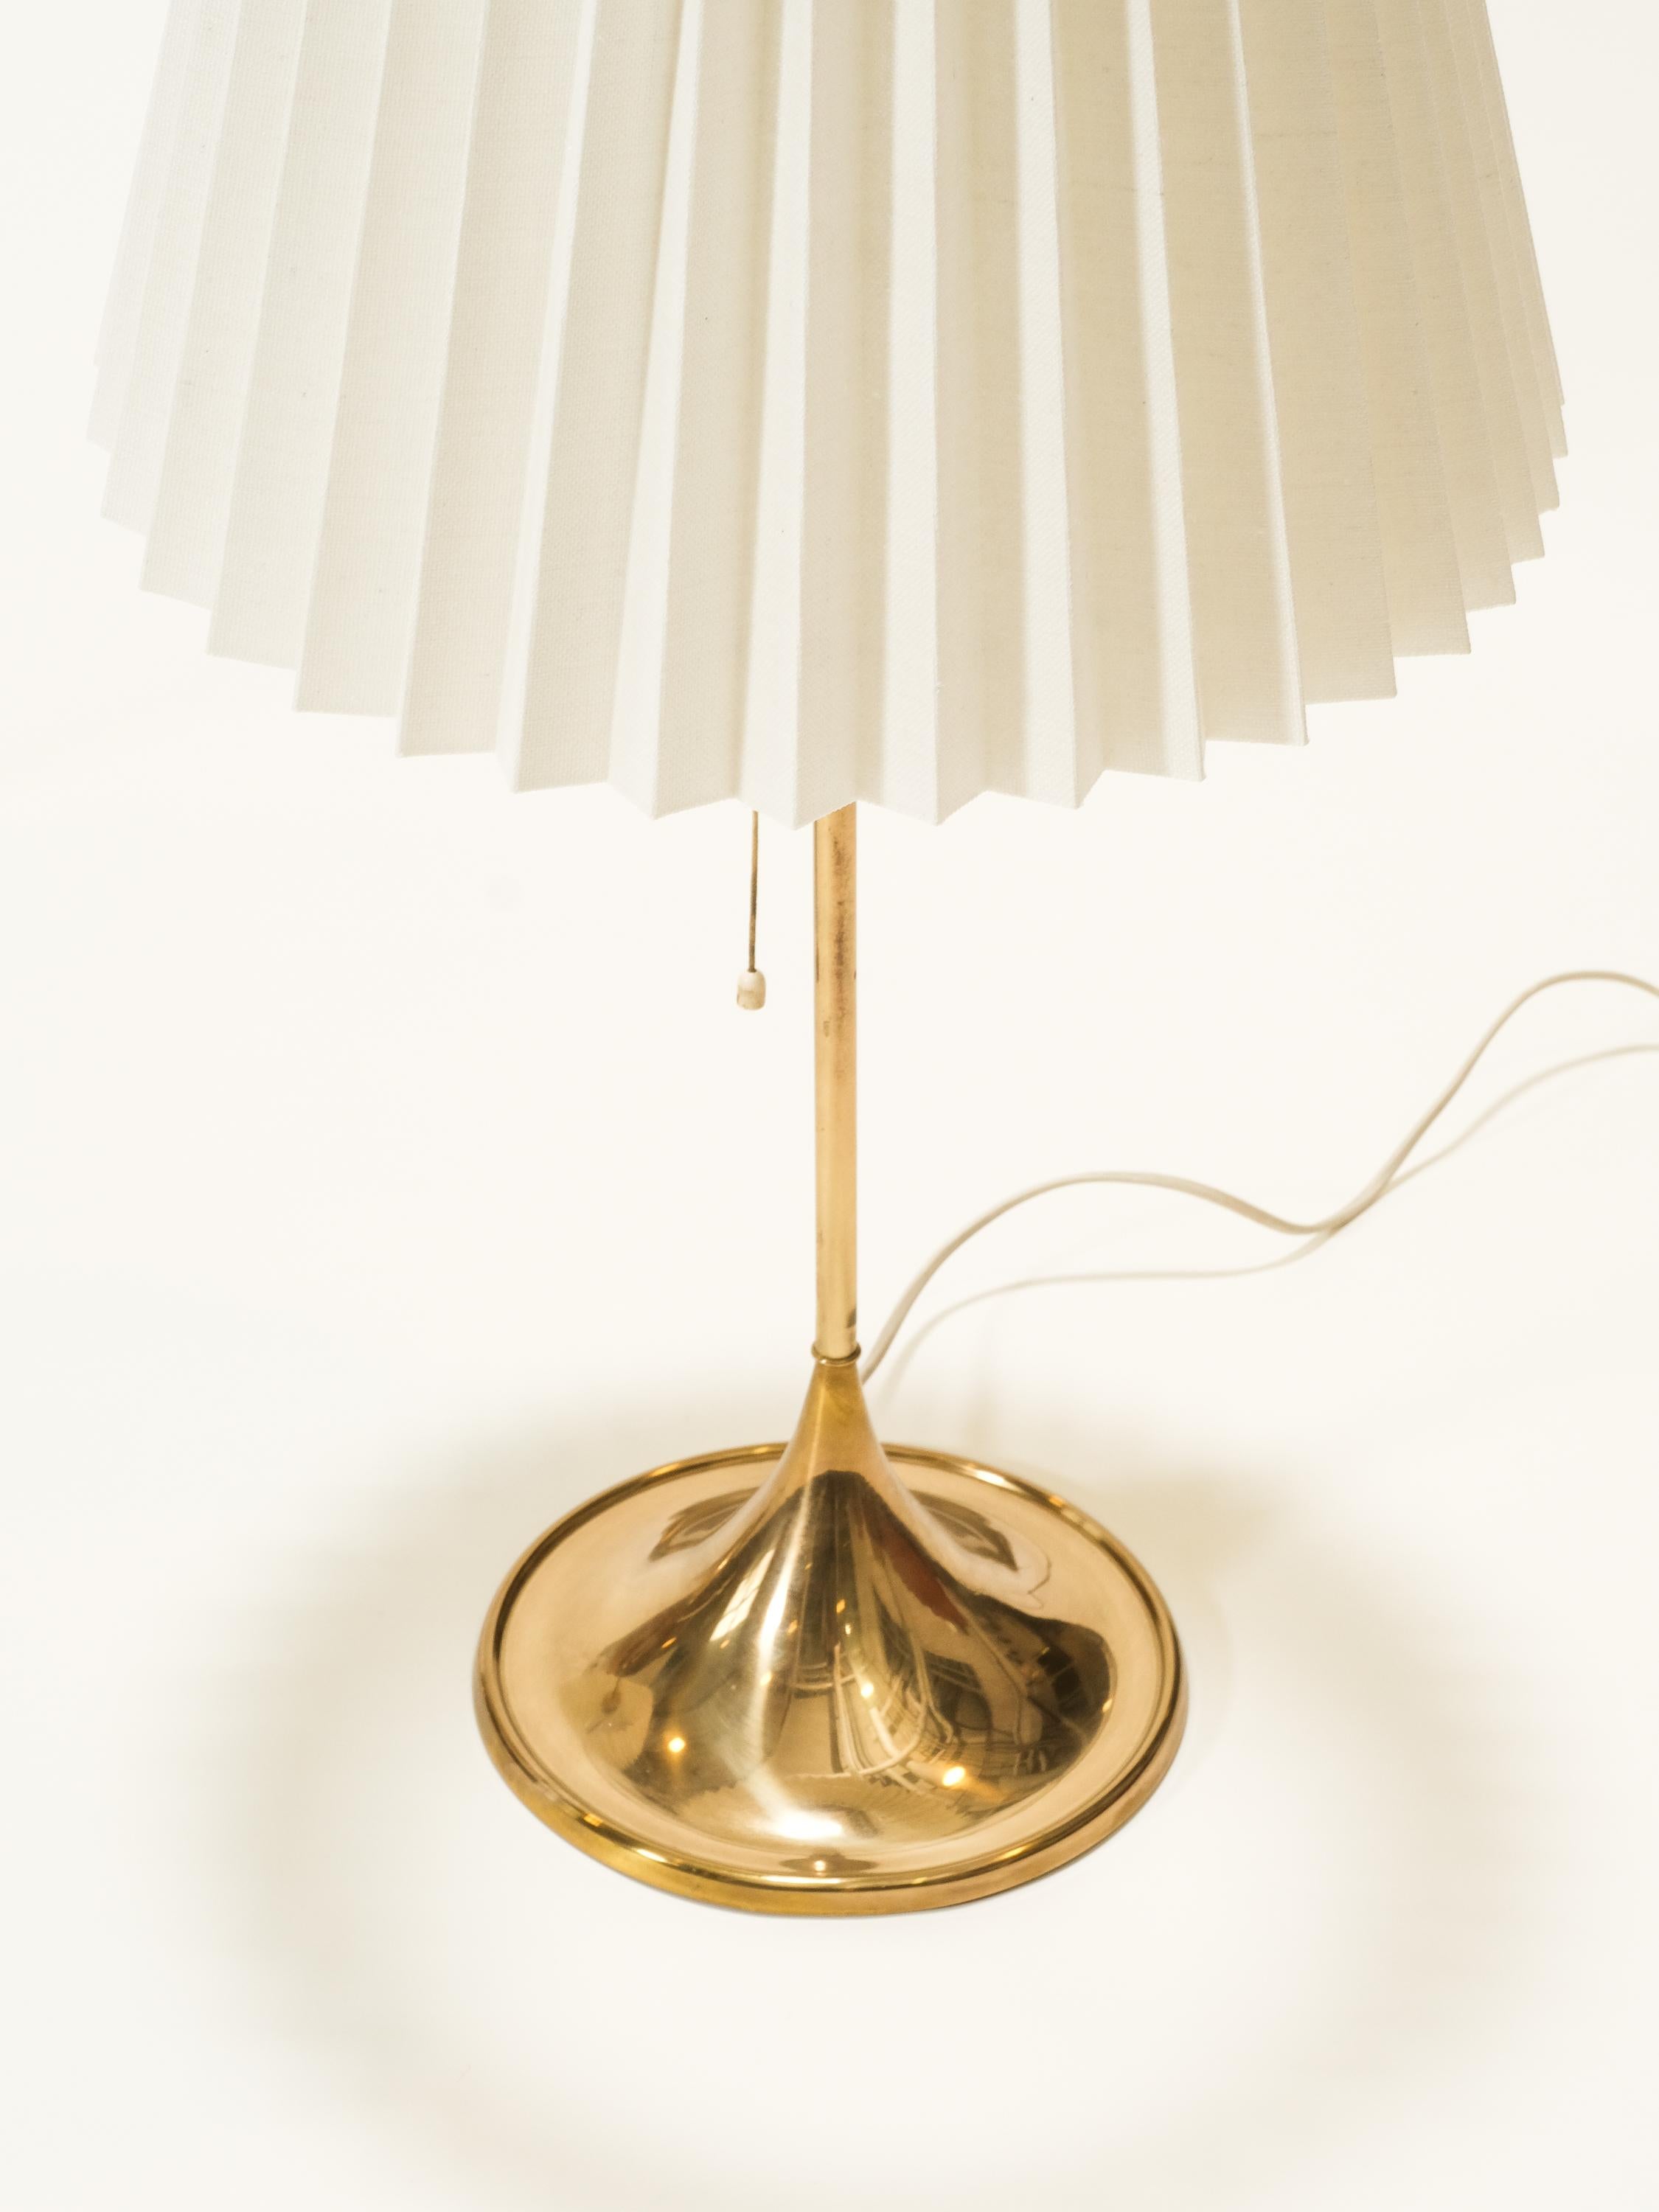 Mid-20th Century Pair of Brass Table Lamps Model B-024 by Bergboms, Sweden, 1960s